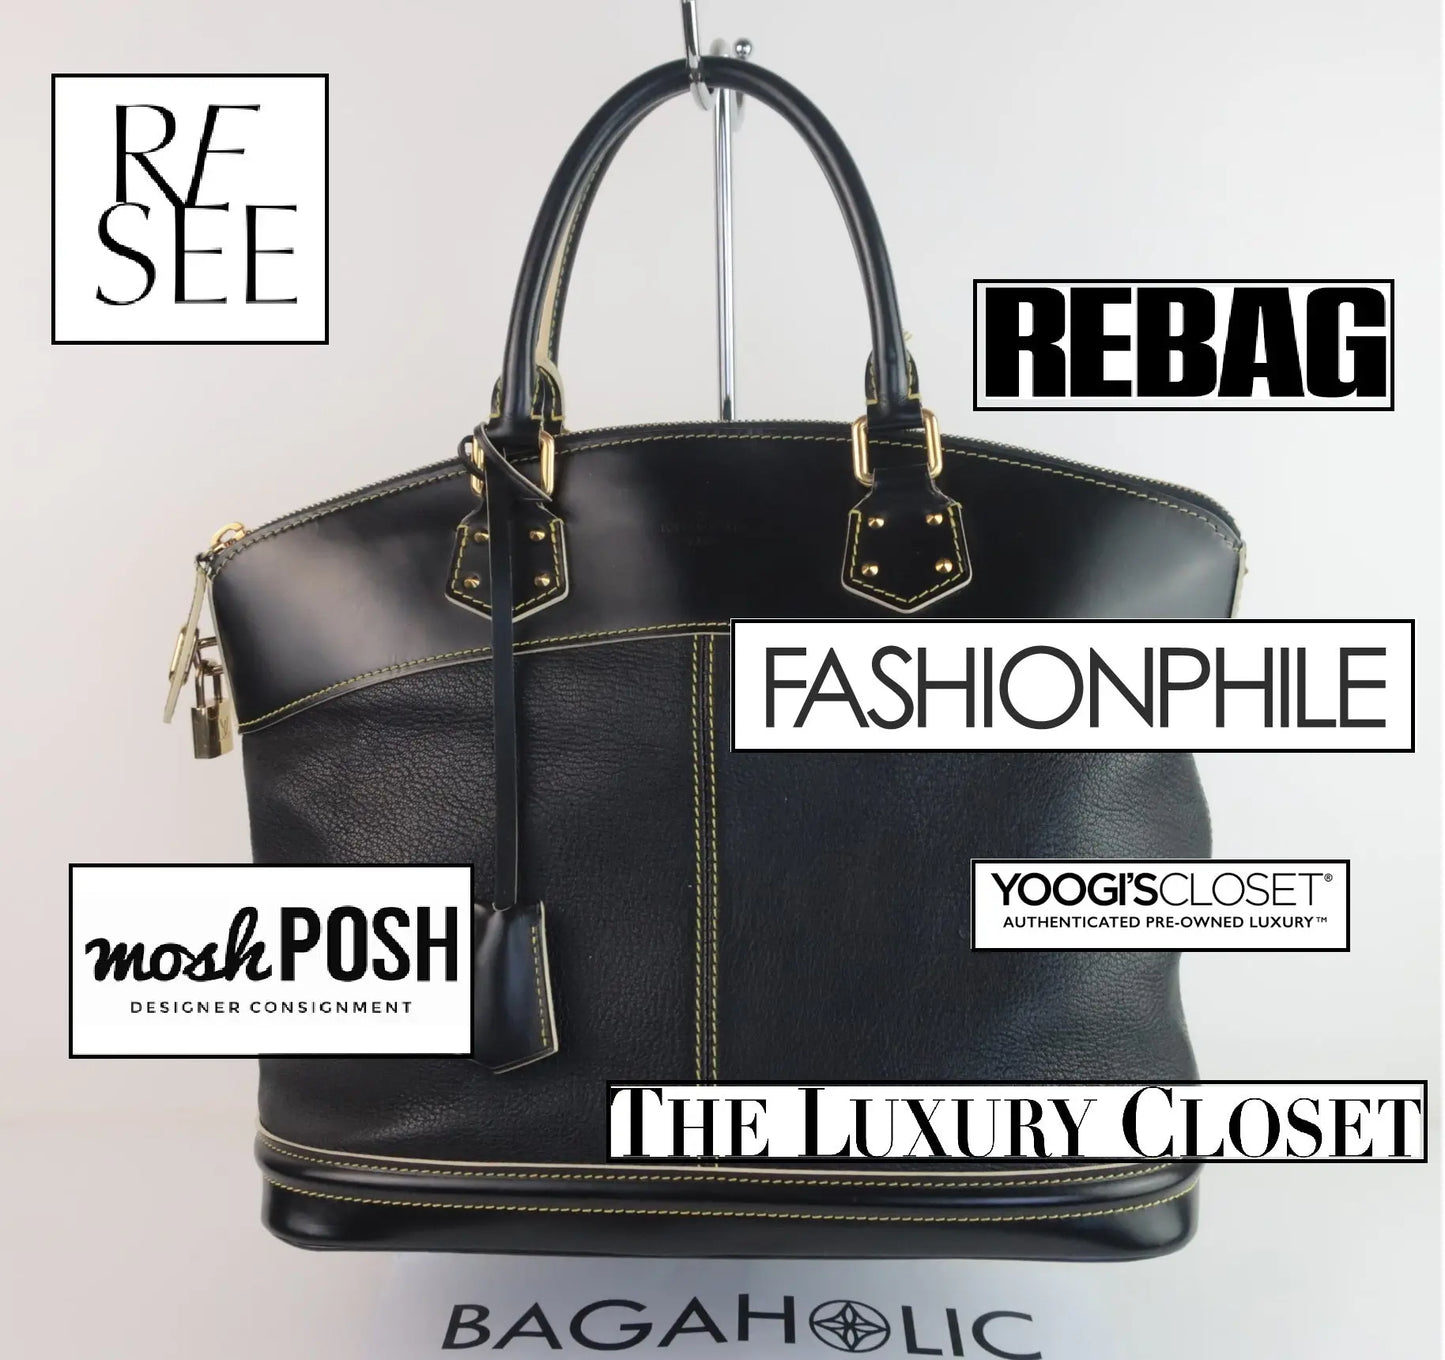 Sell Used Designer Handbags - Instant Quotes